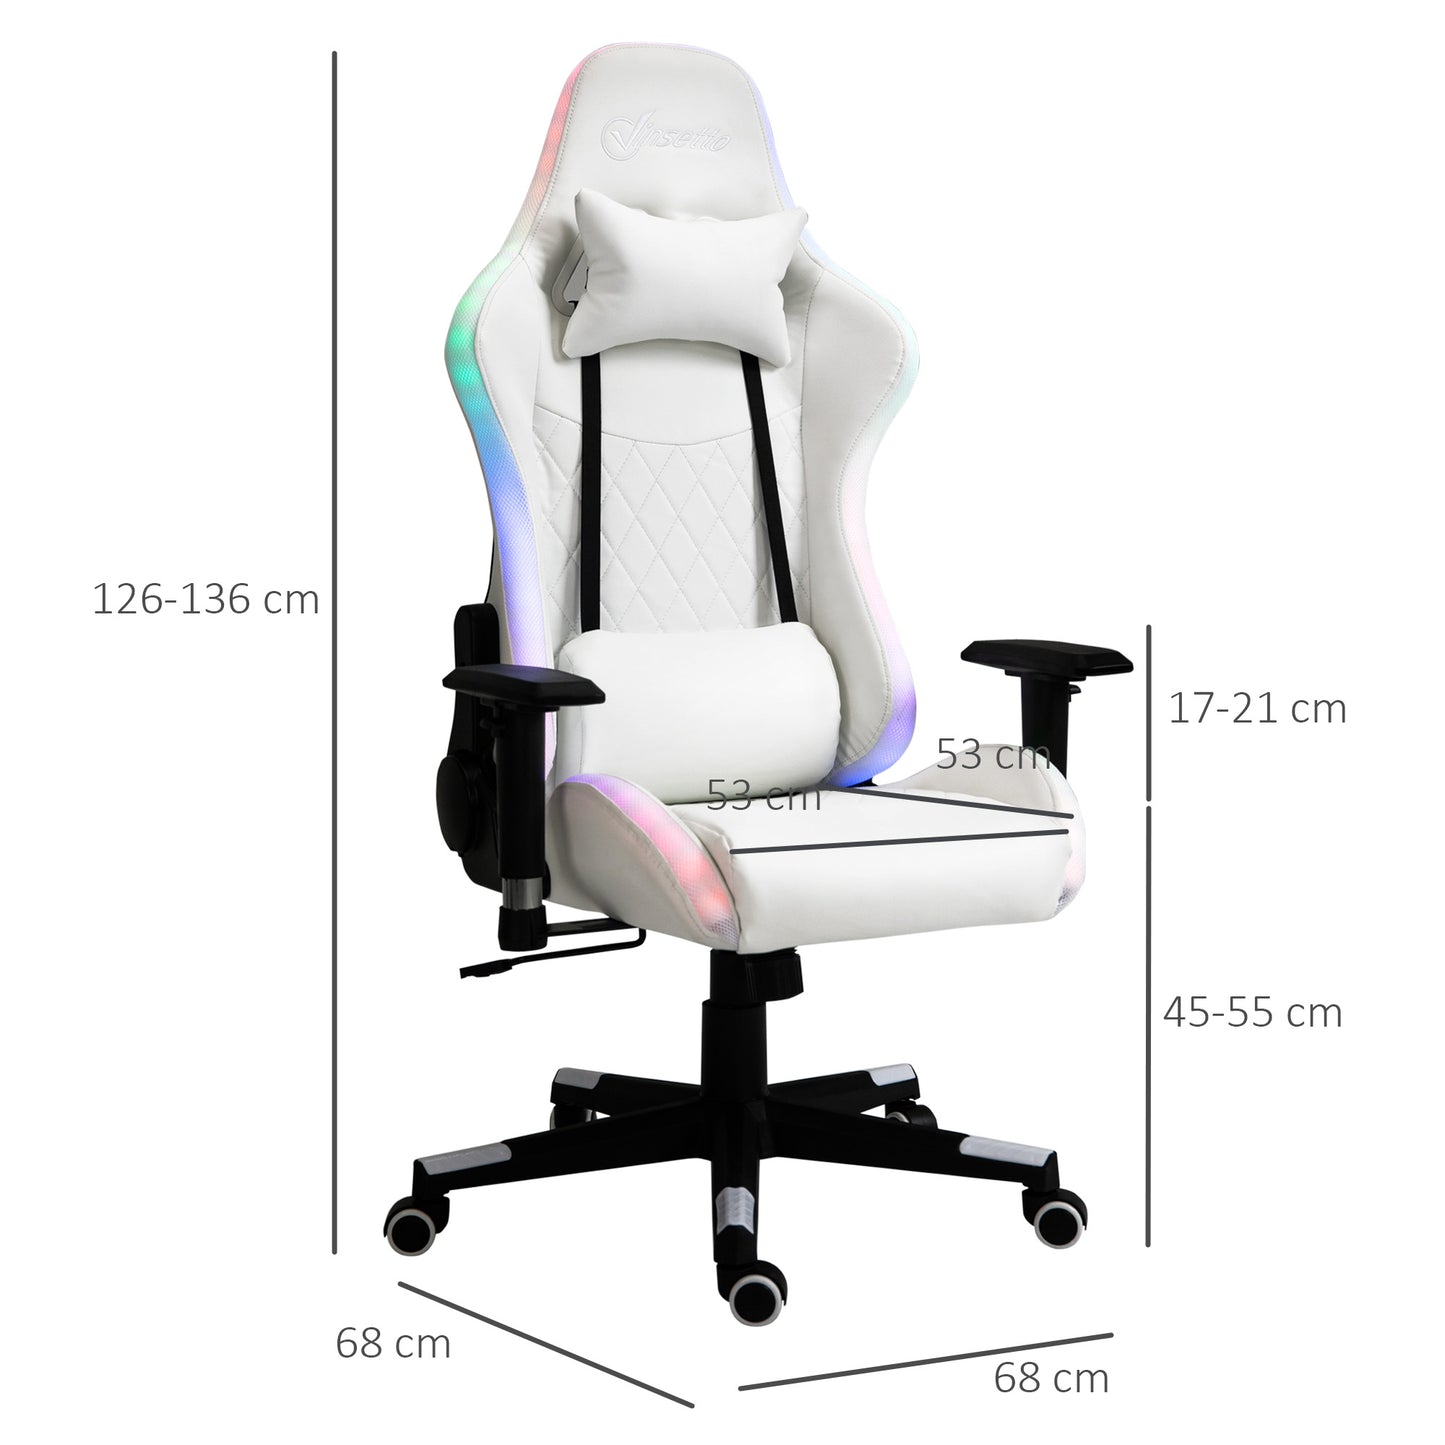 Vinsetto Gaming Chair w/ RGB LED Light, Arm, Swivel Home Office Gamer Recliner, White